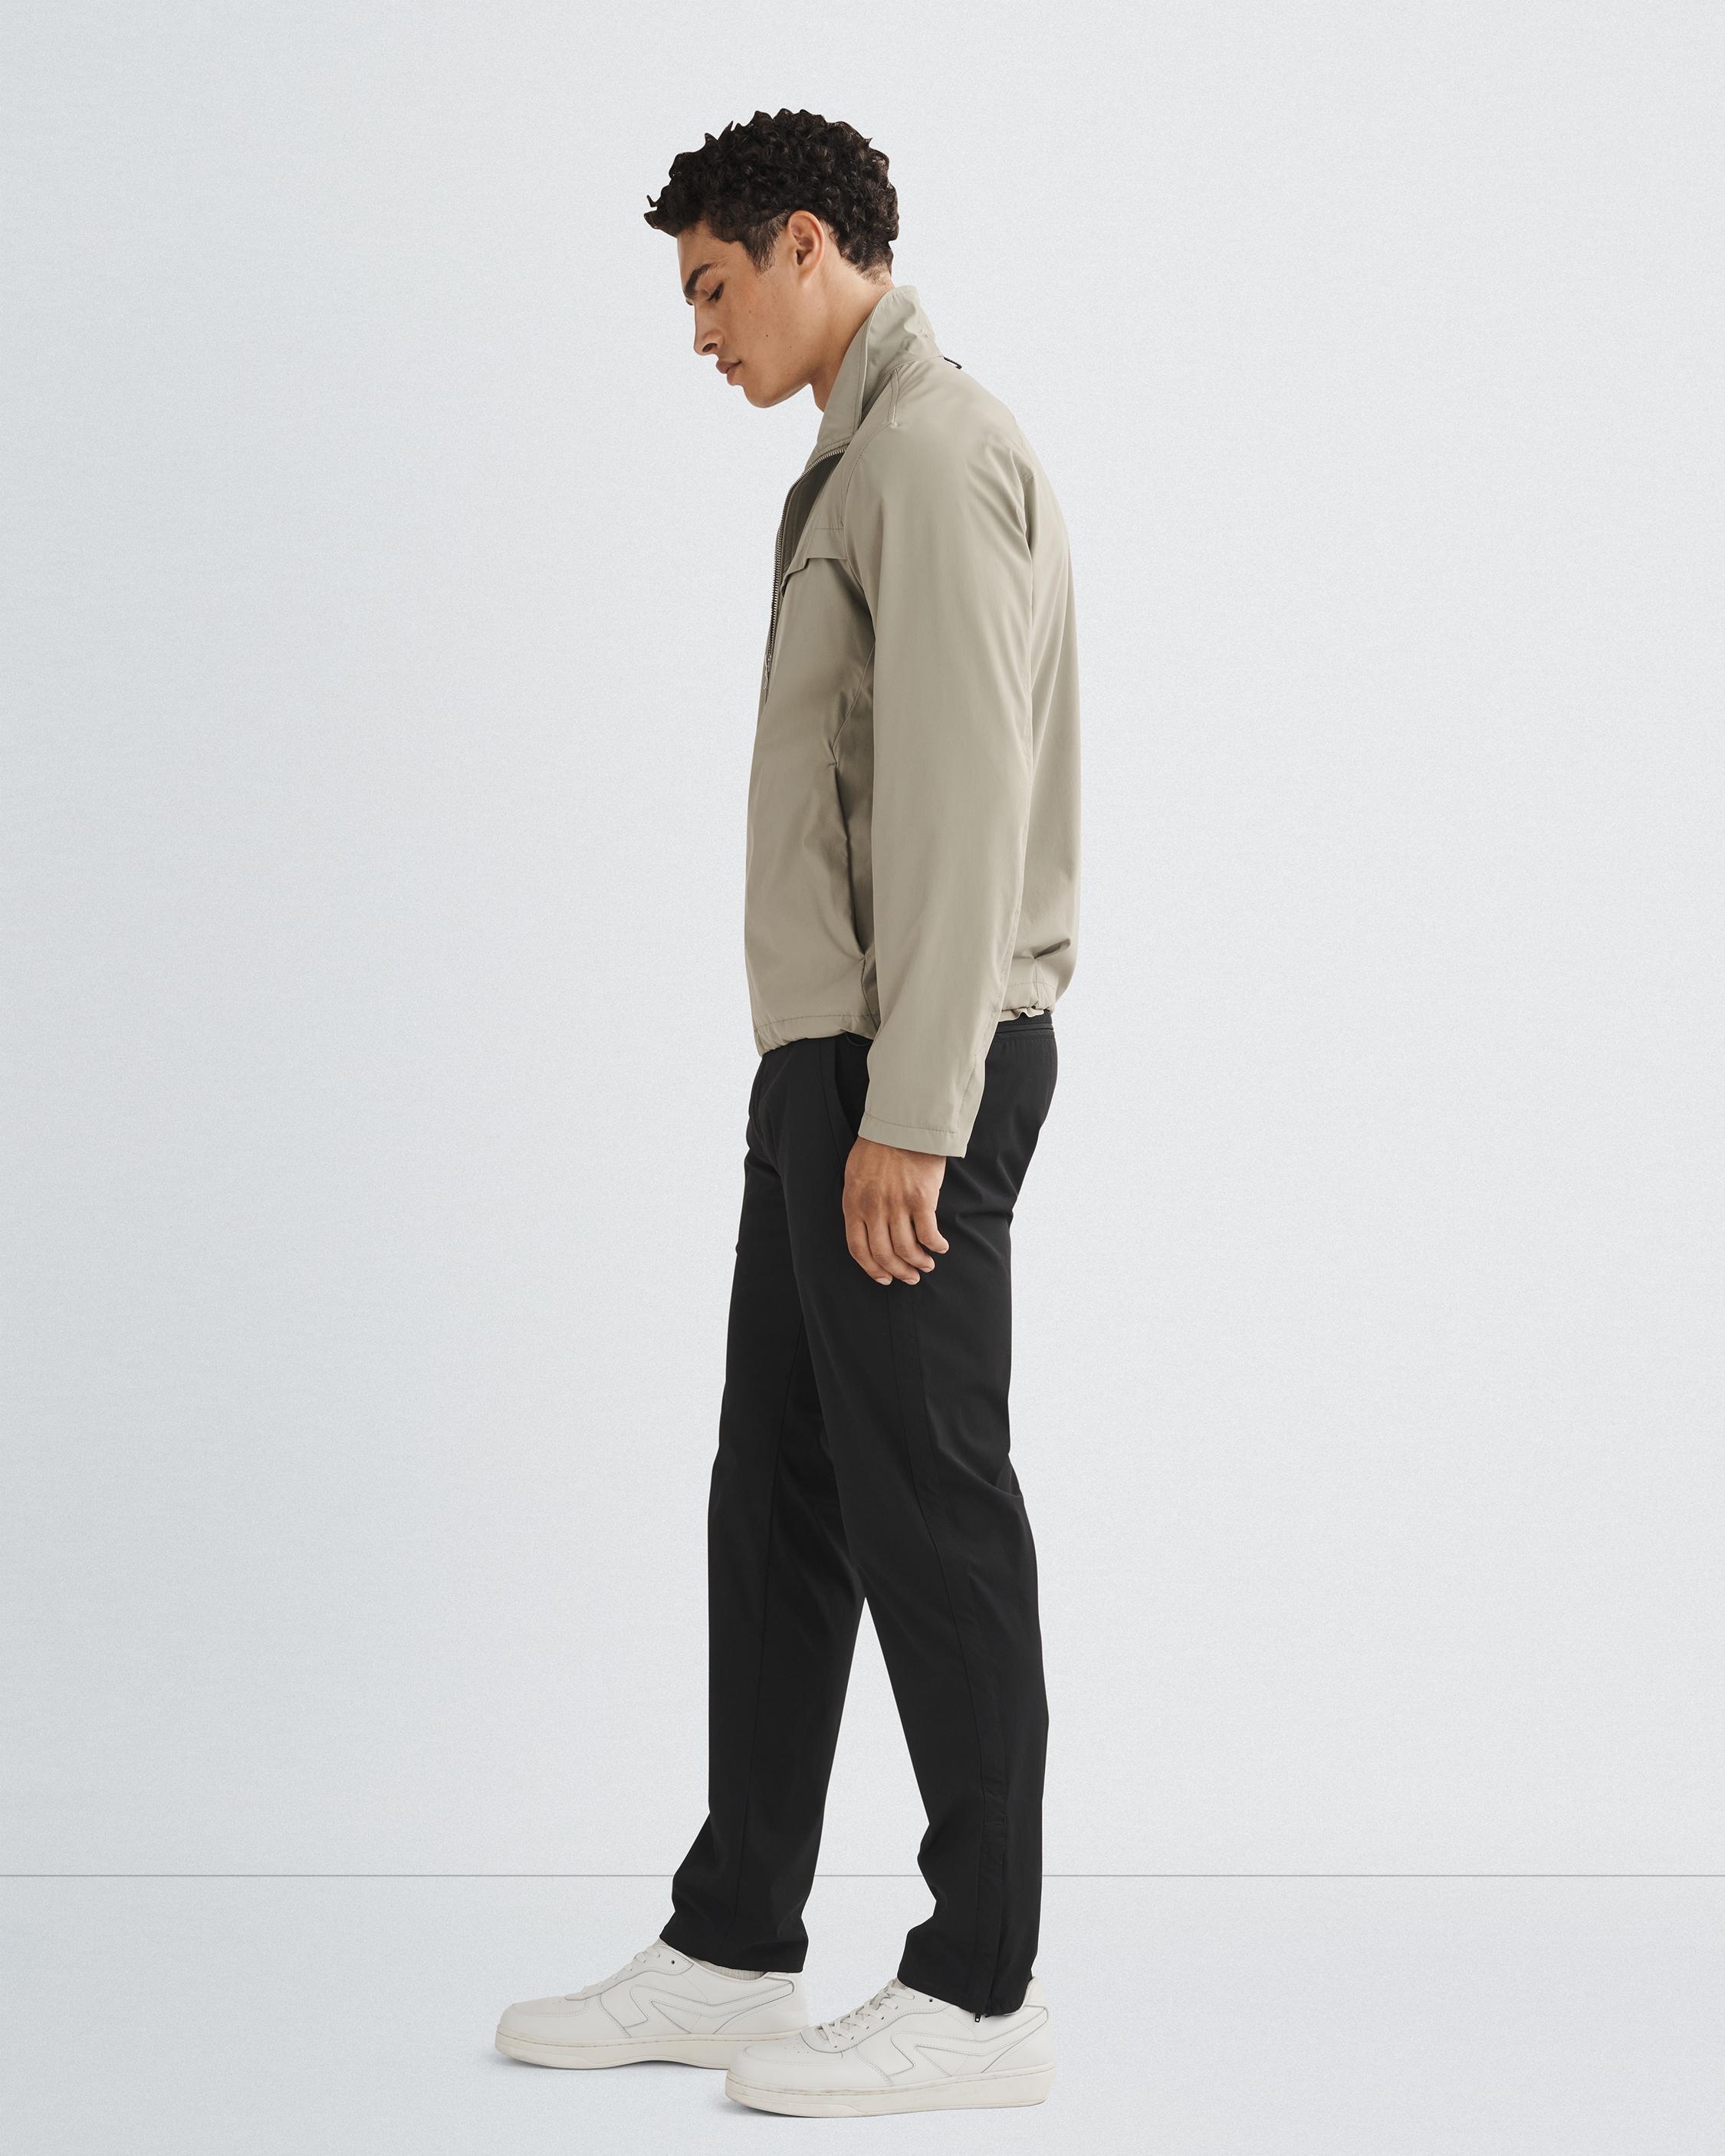 Pursuit Grant Technical Jacket
Relaxed Fit Jacket - 4